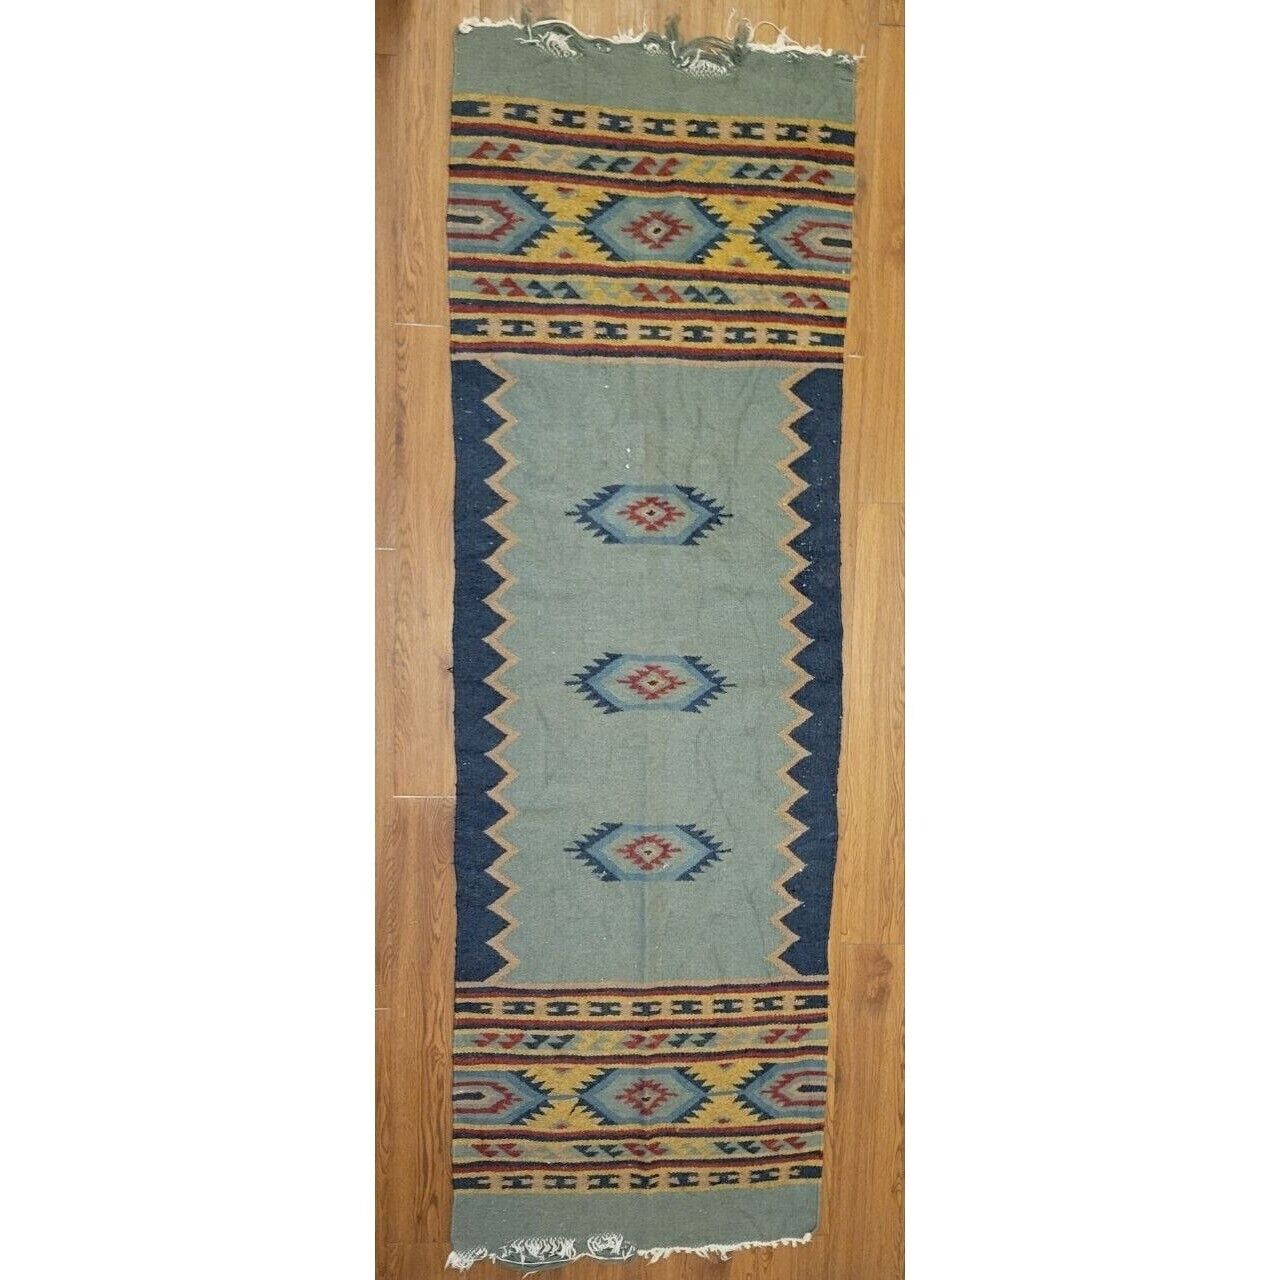 Vintage Zapotec Wool Hand woven Weaving Fringed Rug 30 x 95